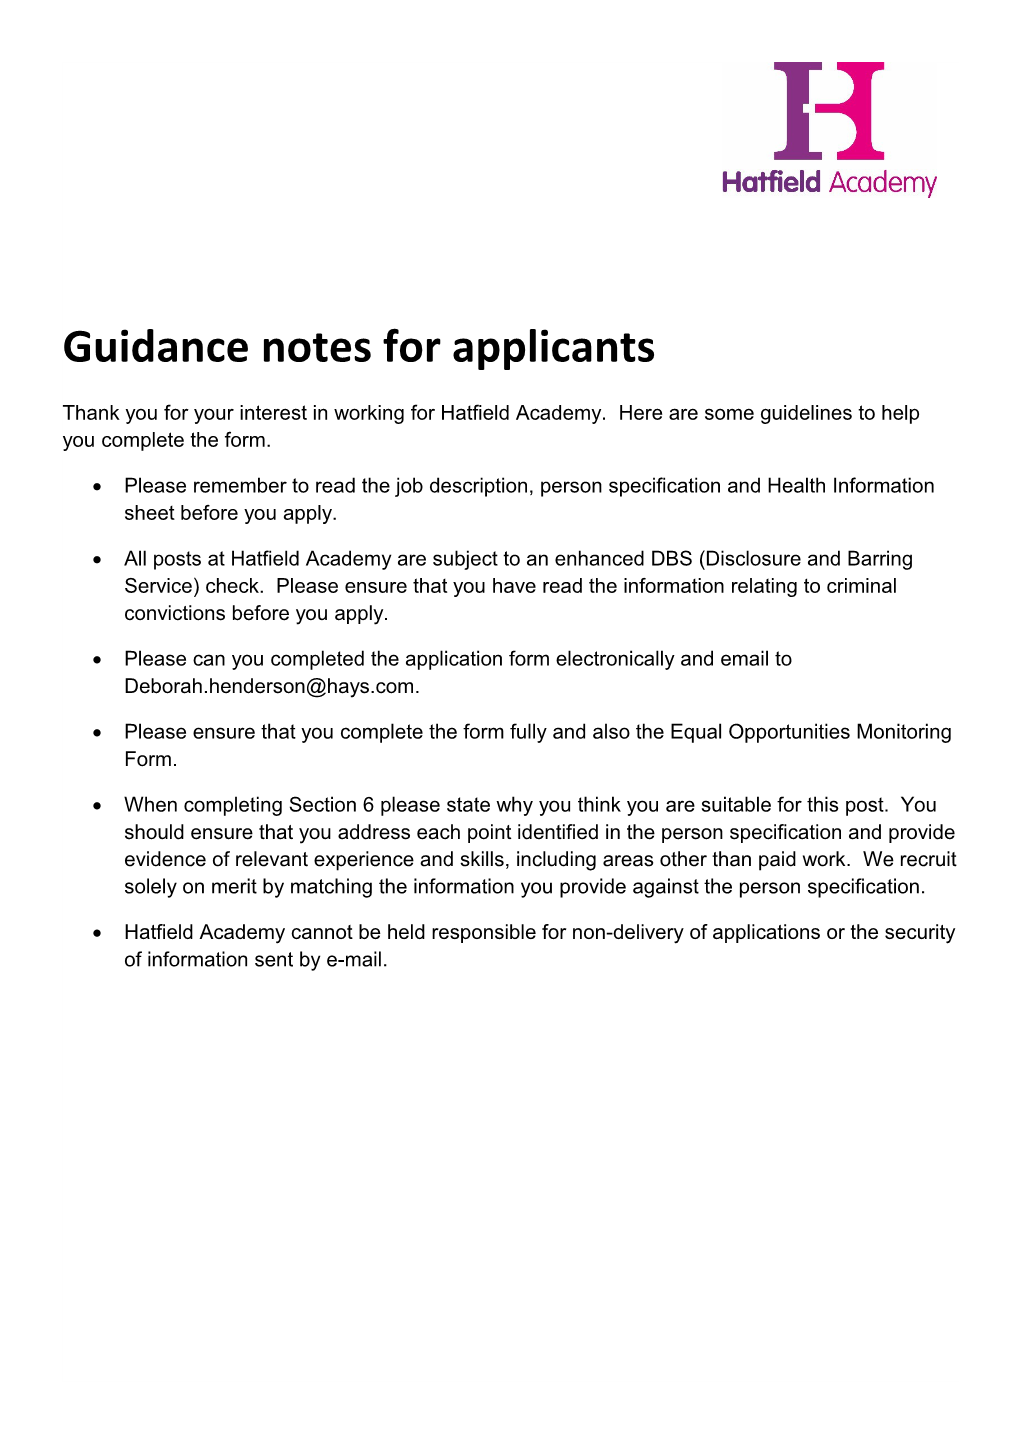 Guidance Notes for Applicants s1